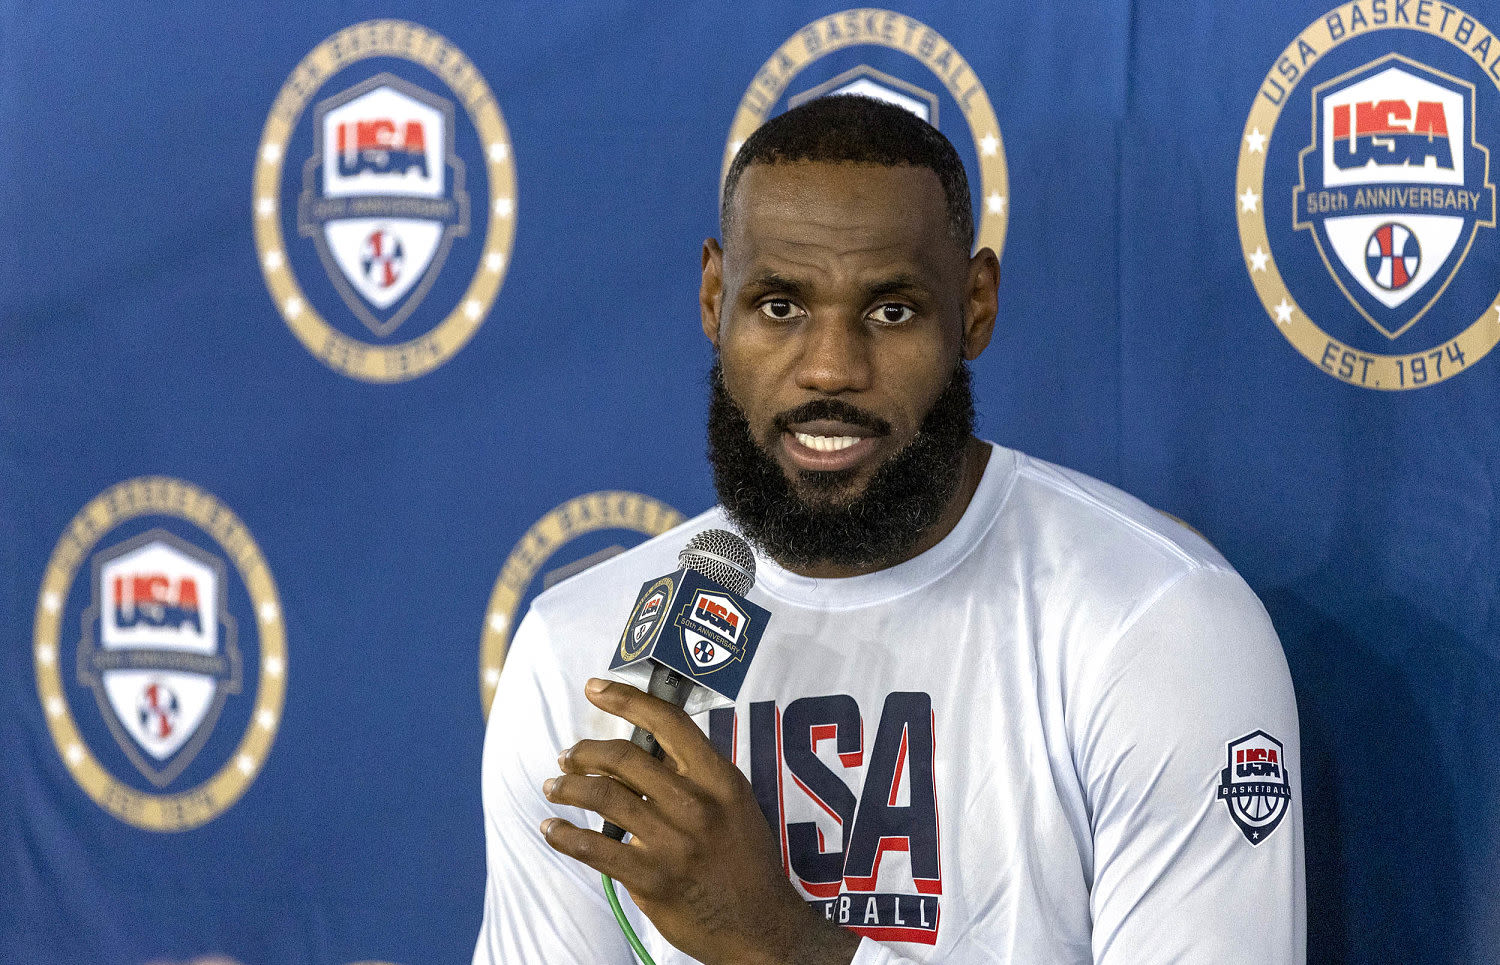 EXCLUSIVE: LeBron James, not playing basketball? The legend reveals the other Olympic sport he’d want to compete in